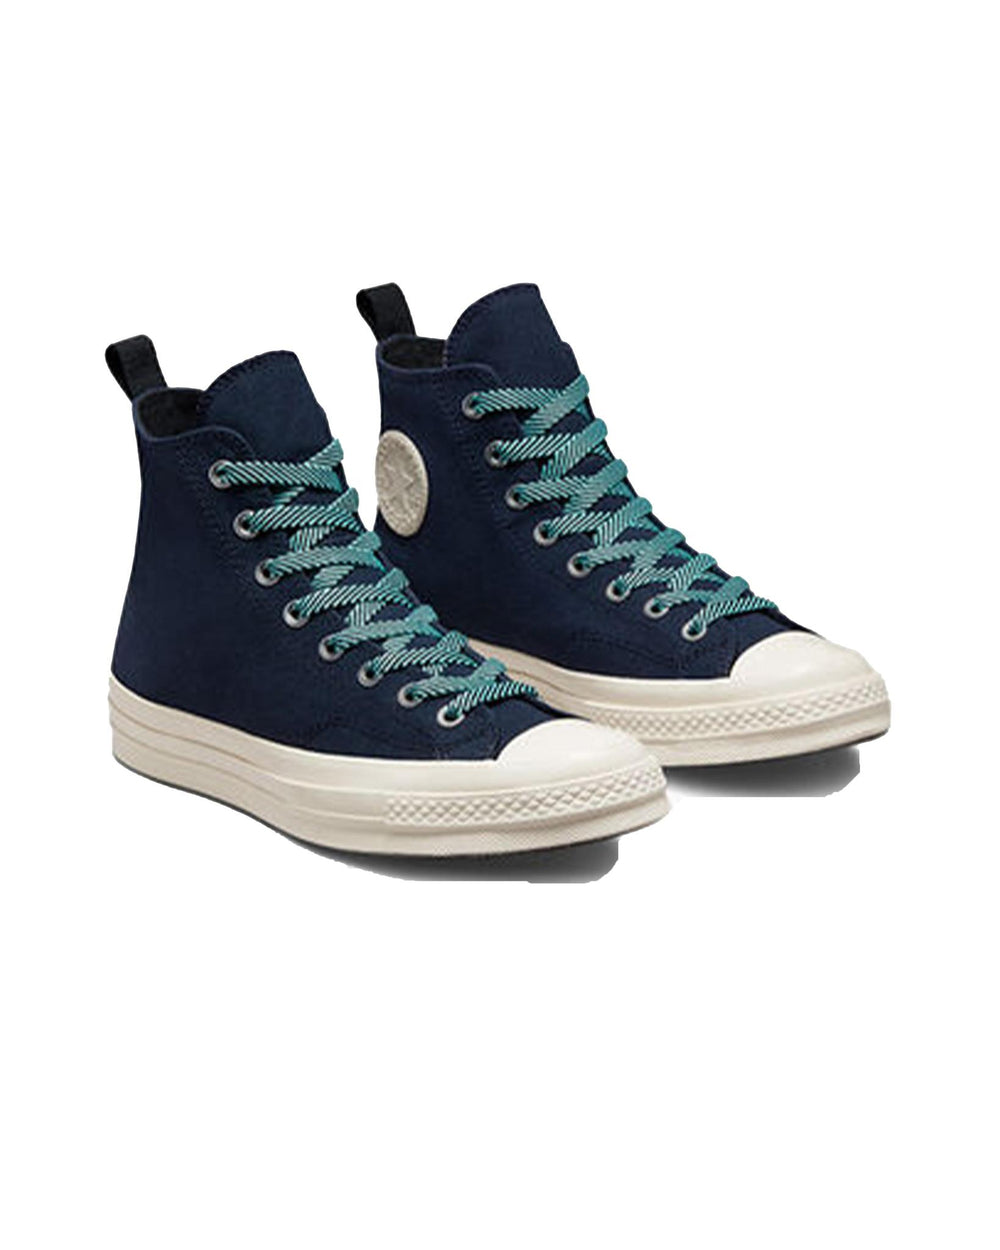 Converse Chuck Gore-tex Counter Climate - Obsidian | STASHED